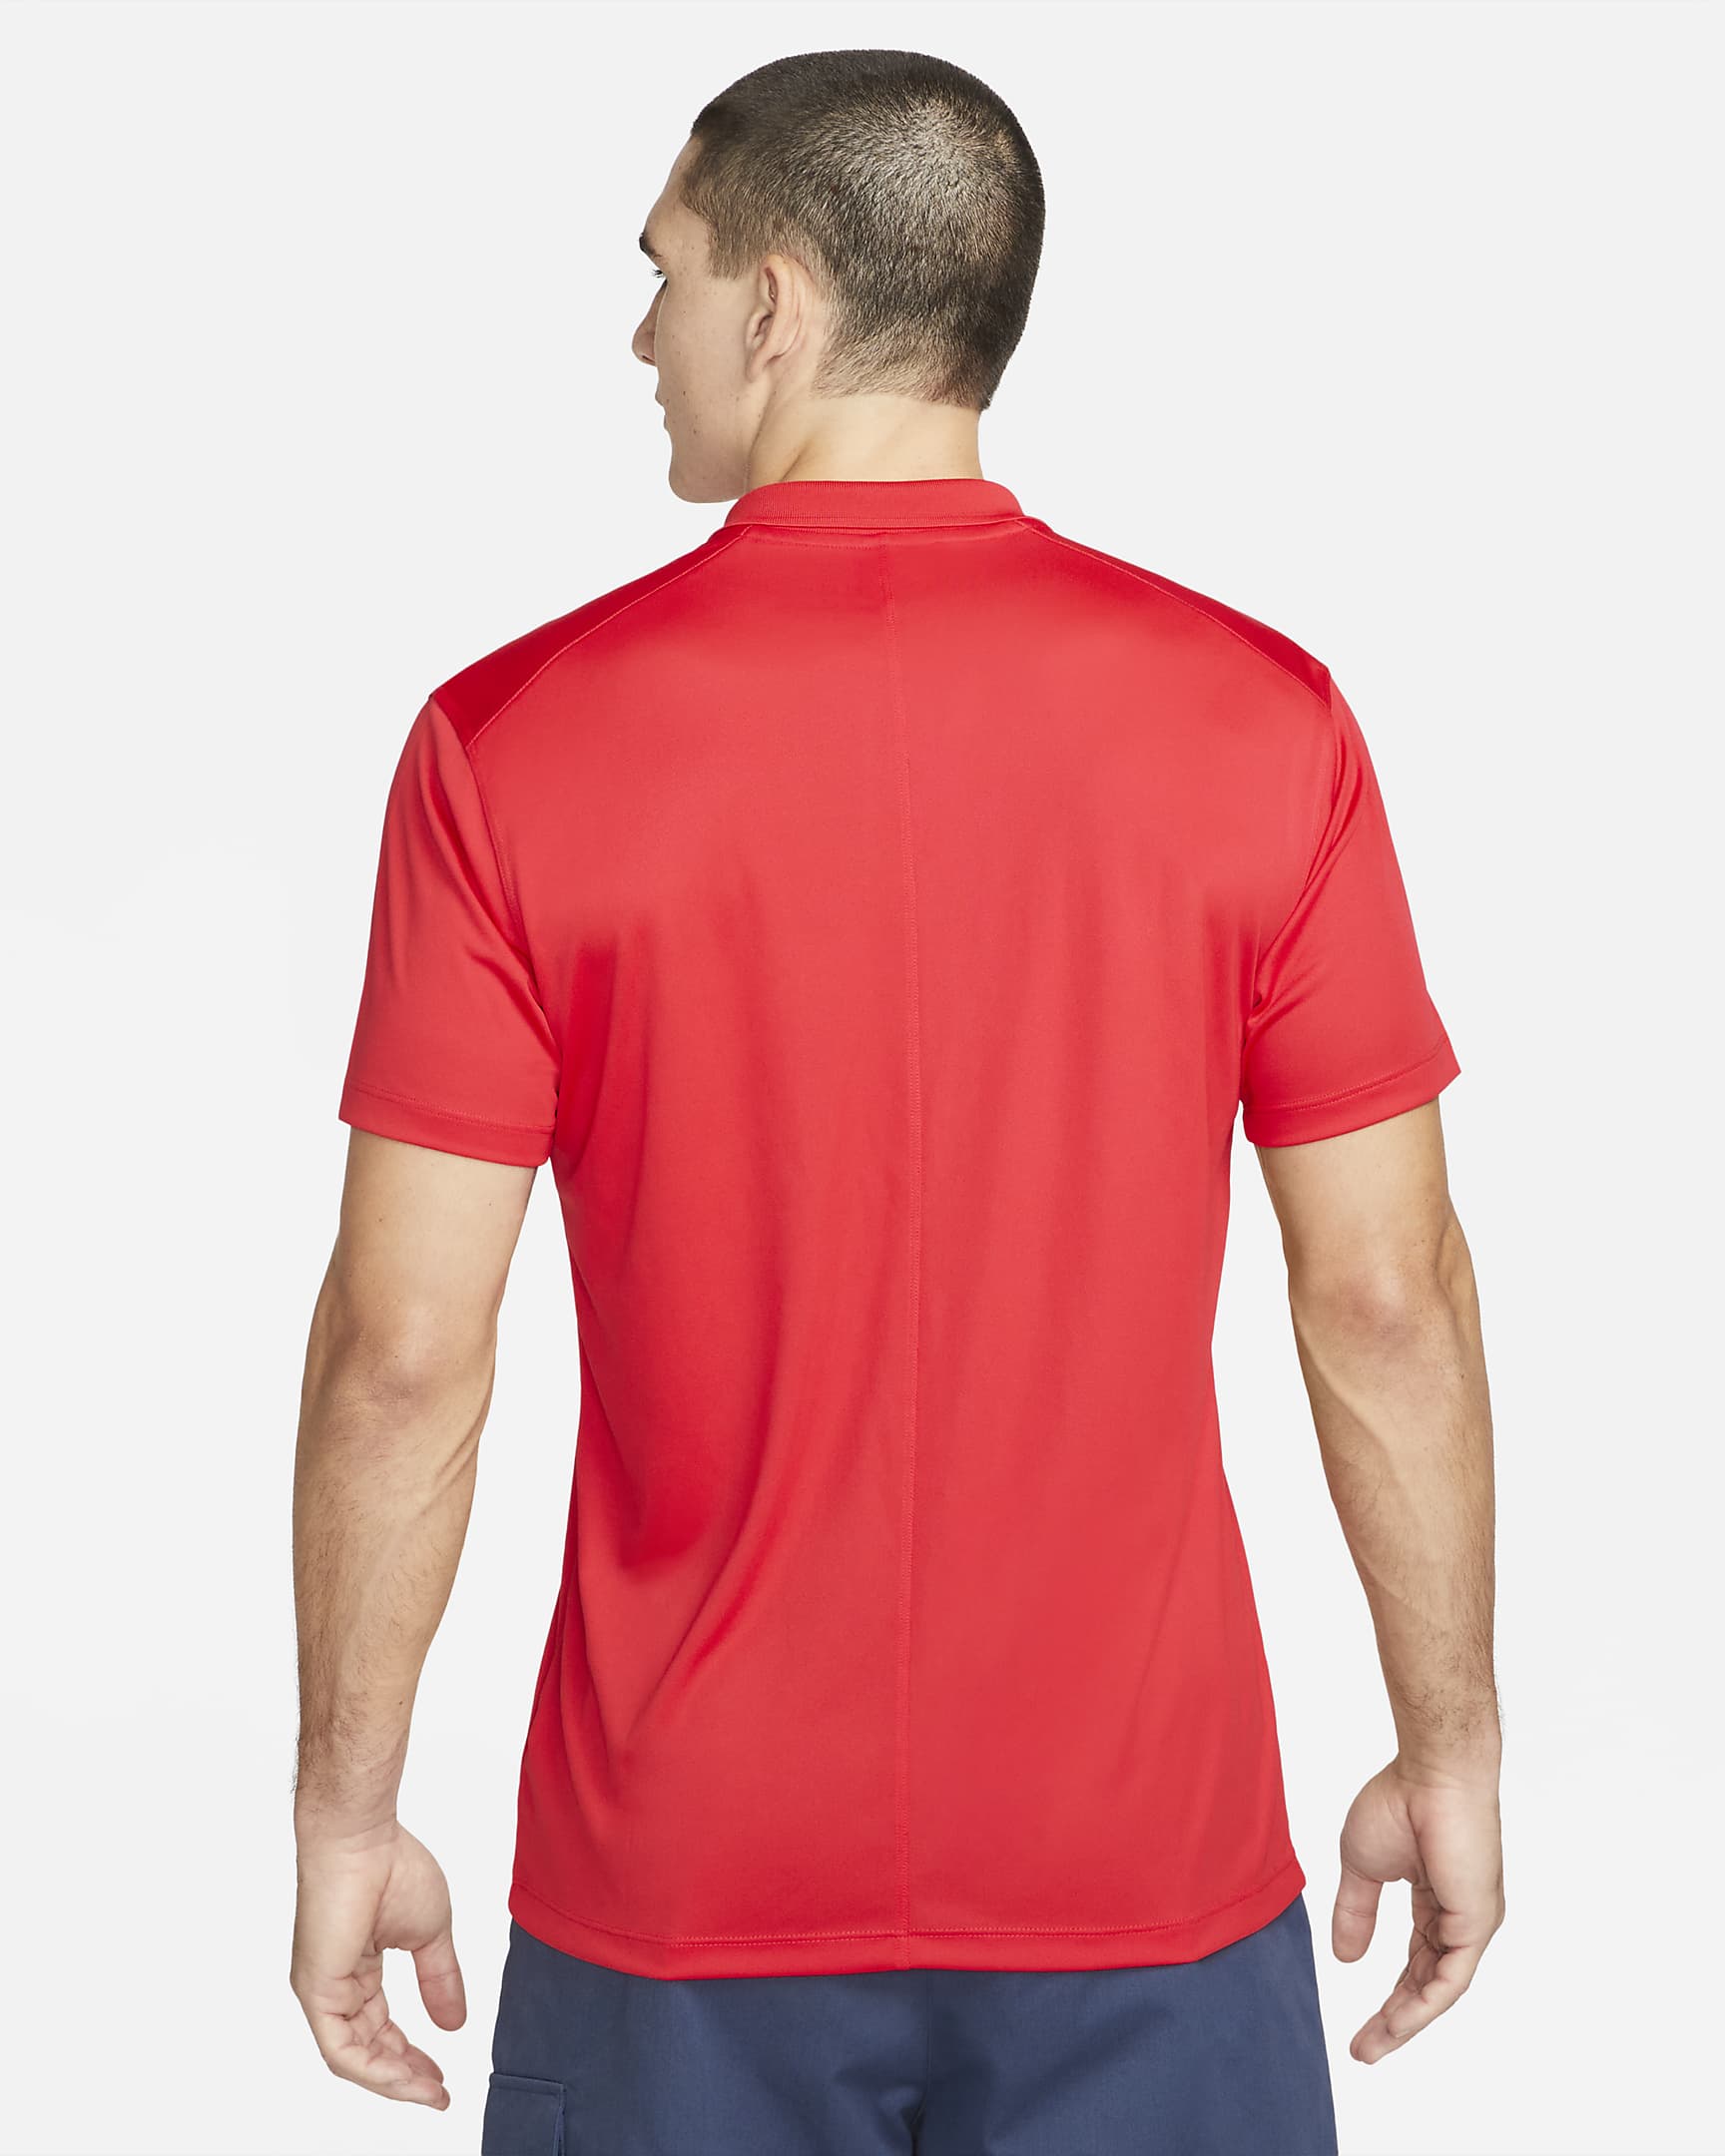 U.S. Victory Men's Nike Dri-FIT Soccer Polo - Speed Red/White